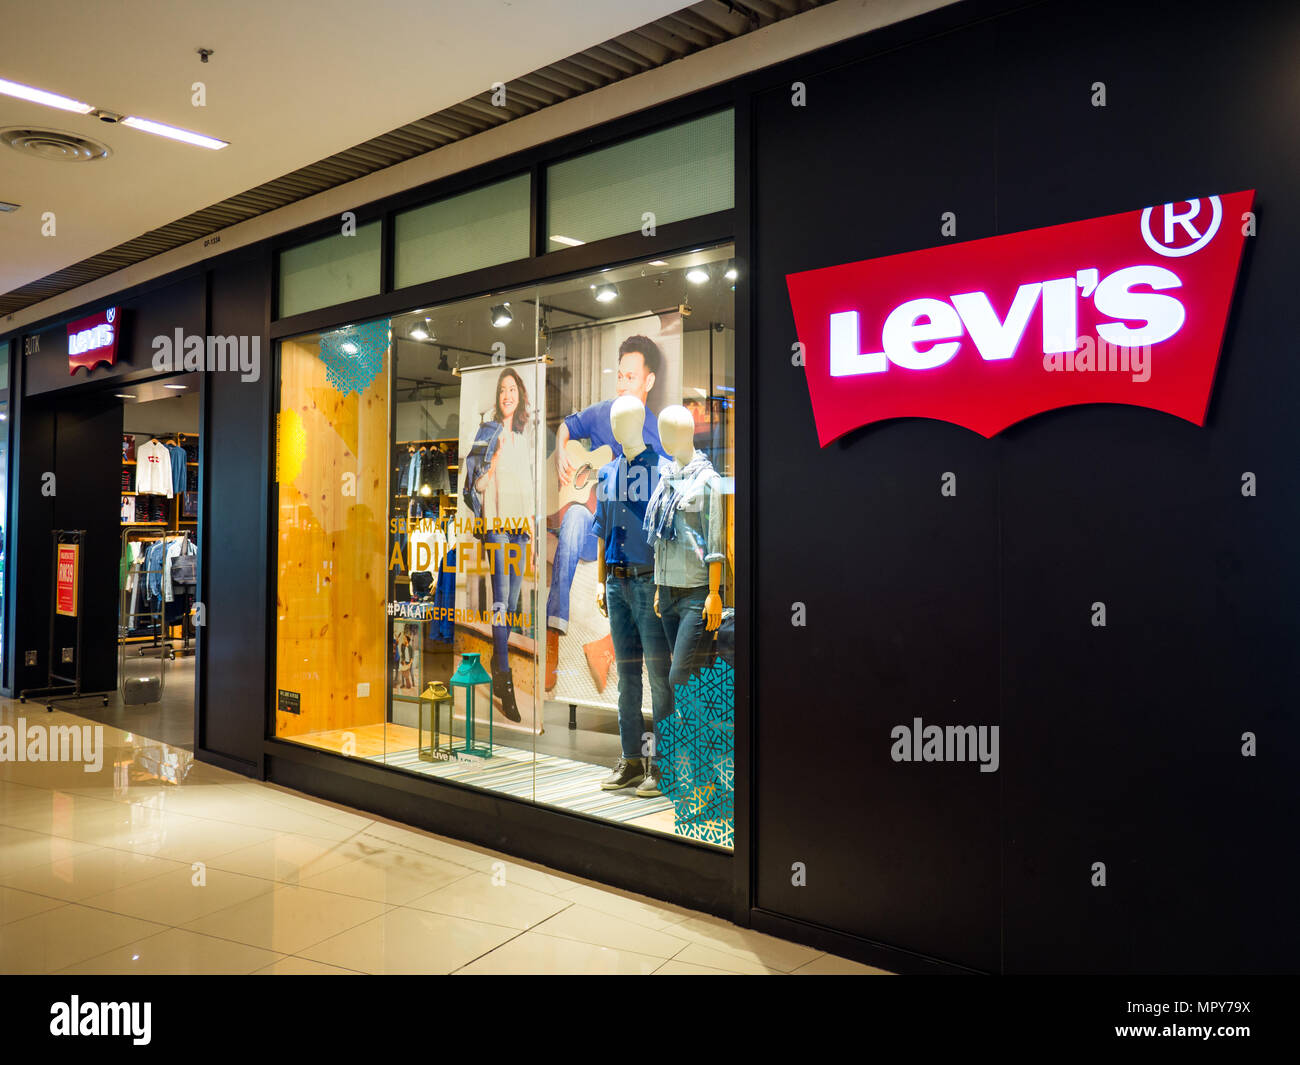 Levi Market High Resolution Stock Photography and Images - Alamy